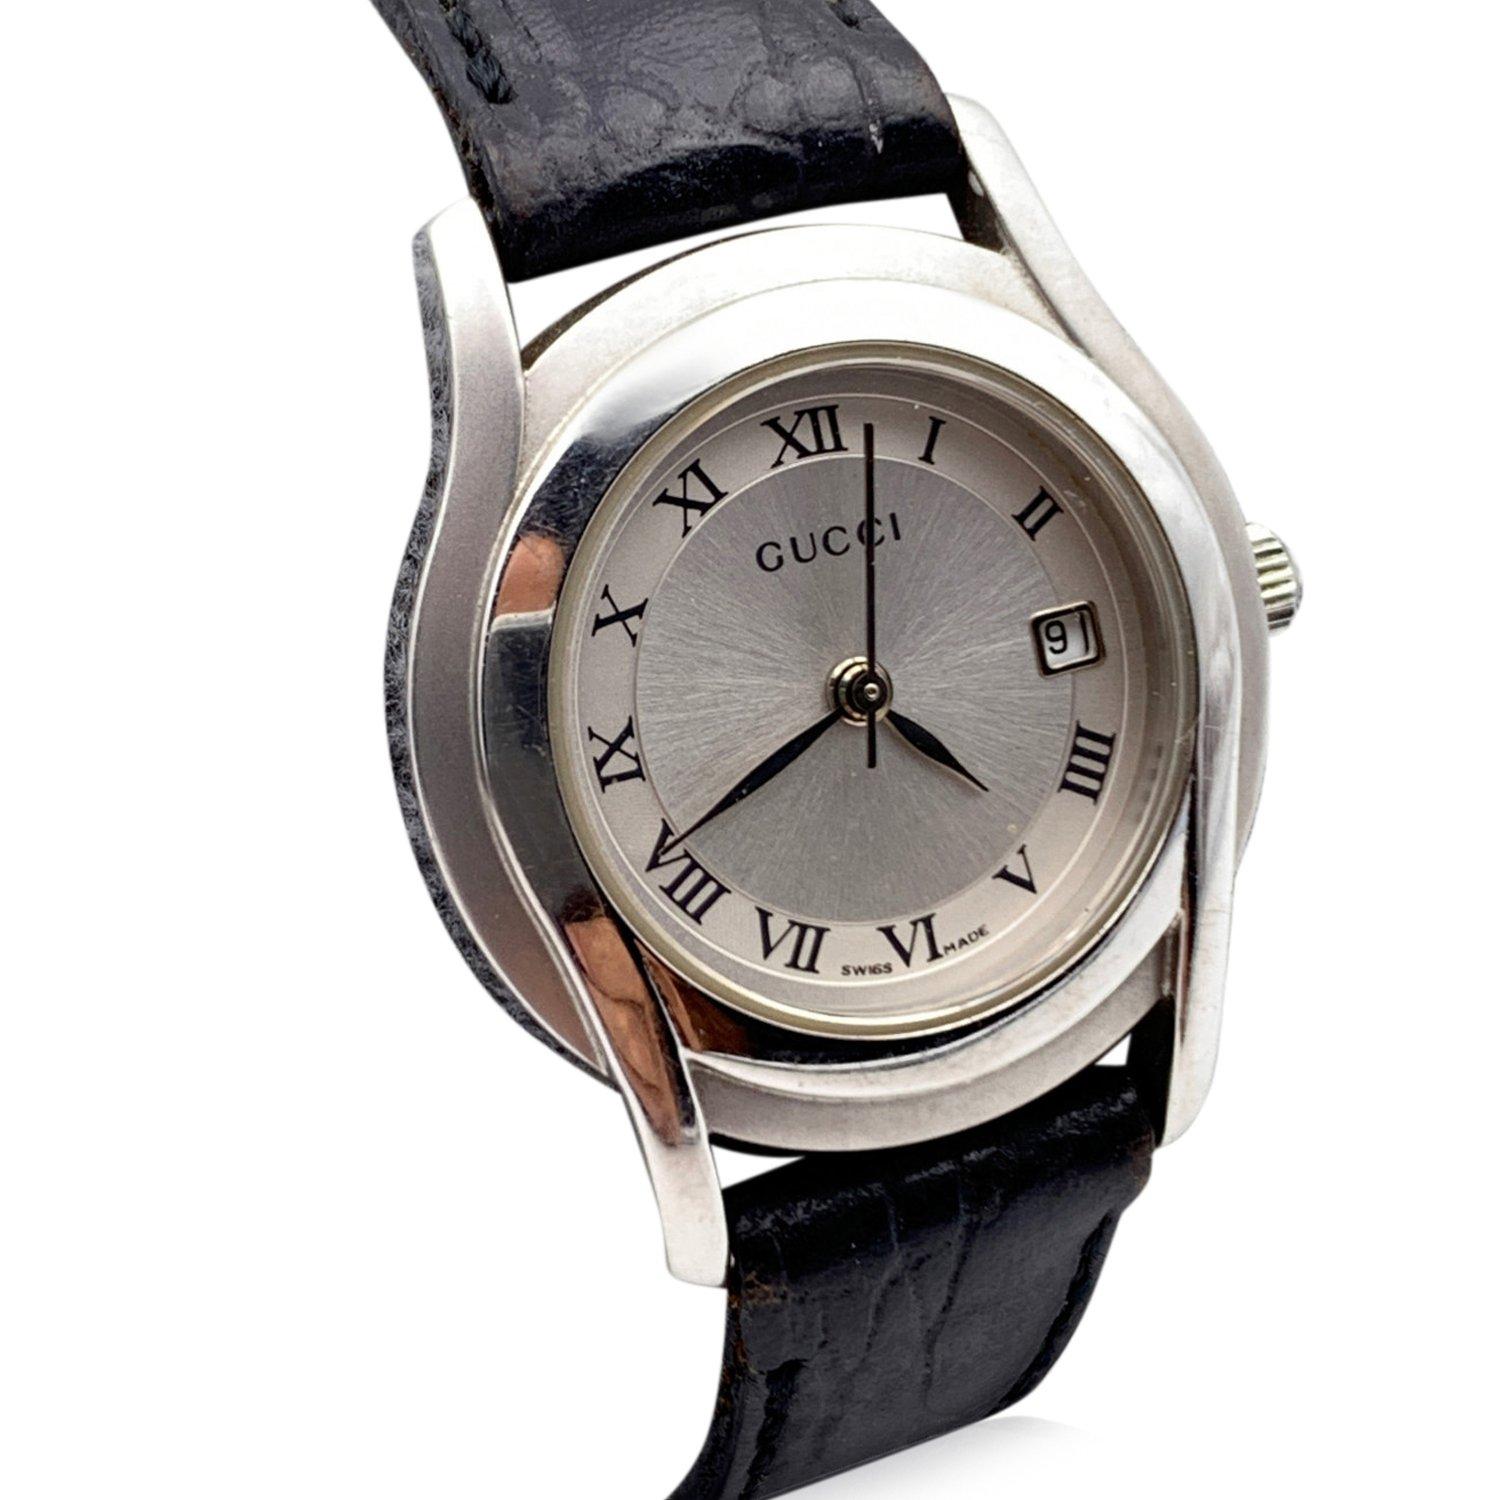 Gucci silver tone stainless steel wrist watch, mod. 5500 L. White Dial. Date at 3 o'clock. Sapphire crystal. Swiss Made Quartz movement. Gucci written on face. Roman numbers. Gucci crest on the reverse of the case. Water Resistant to 3 atm. Black